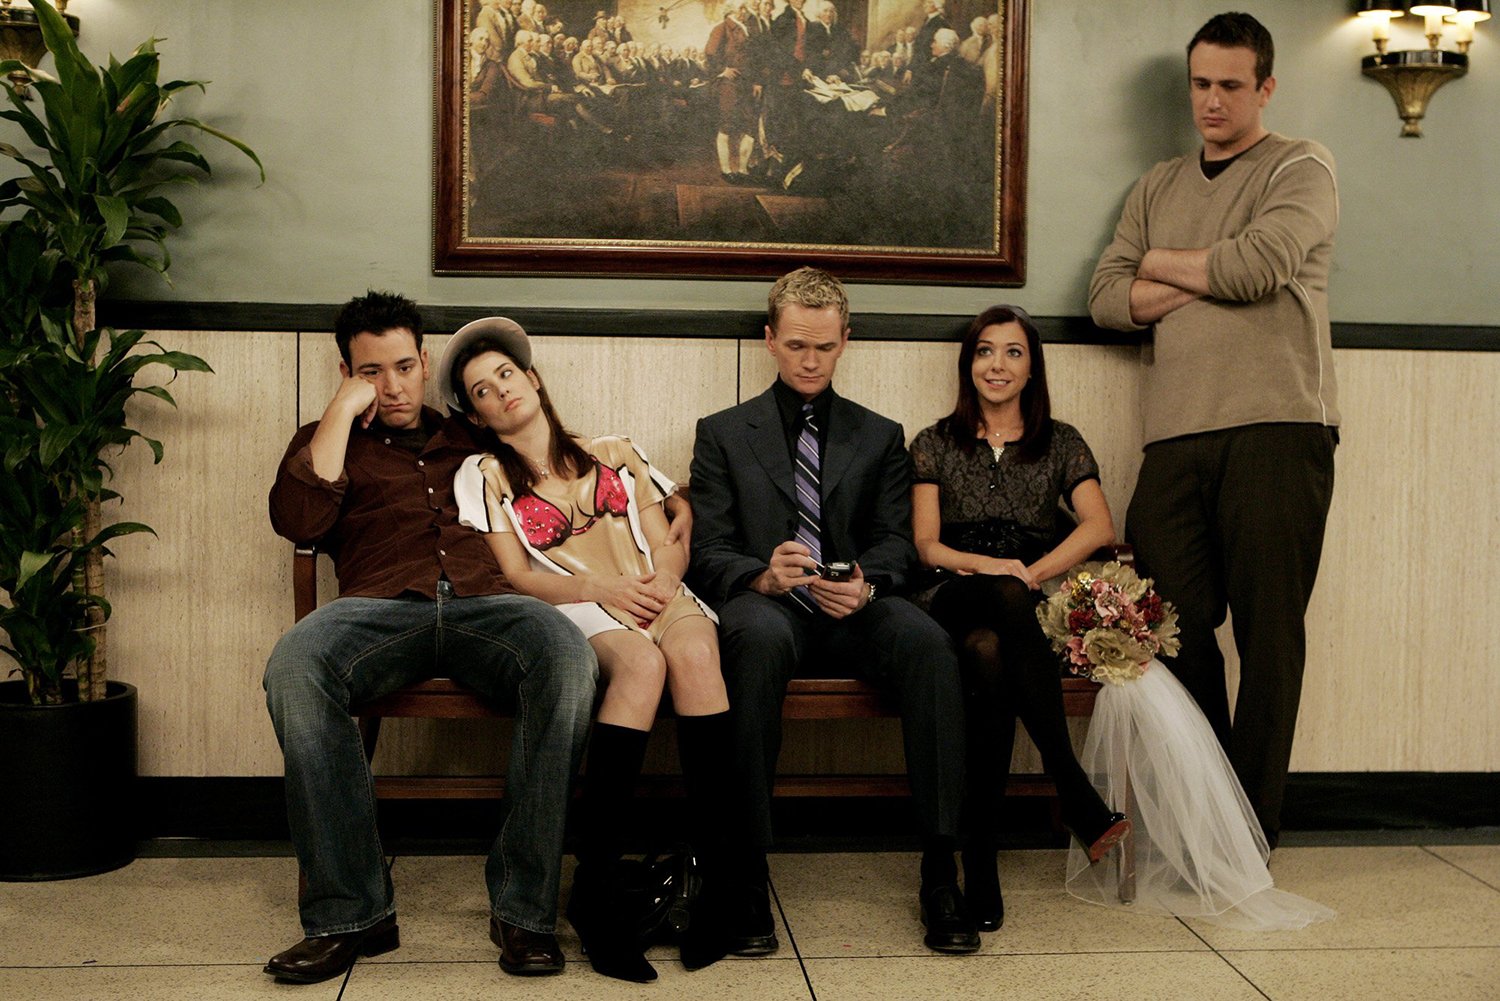 How I Met Your Mother: Josh Radnor as Ted, Cobie Smulders as Robin, Neil Patrick Harris as Barney, Alyson Hannigan as Lily, and Jason Segel as Marshall waiting on a bench in Atlantic City